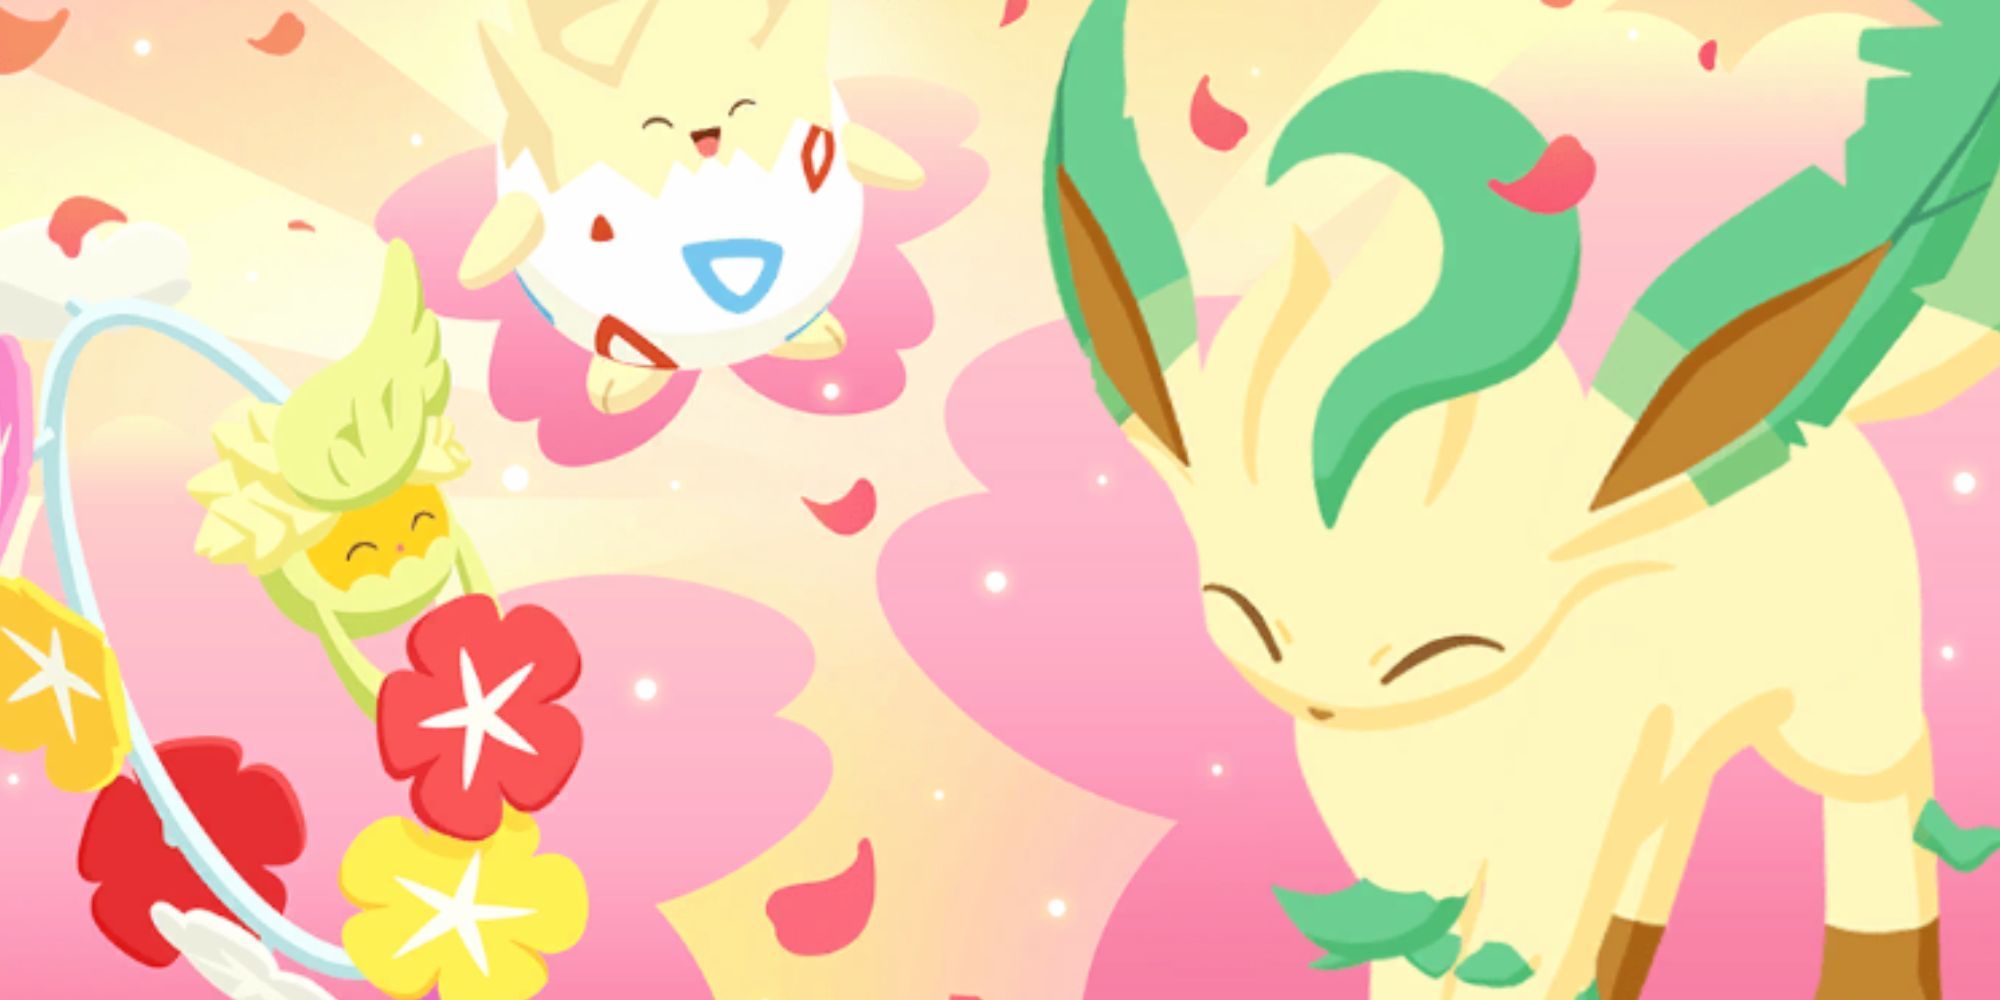 A screenshot of in-game artowrk featuring Togepi, Comfey, and Leafeon.